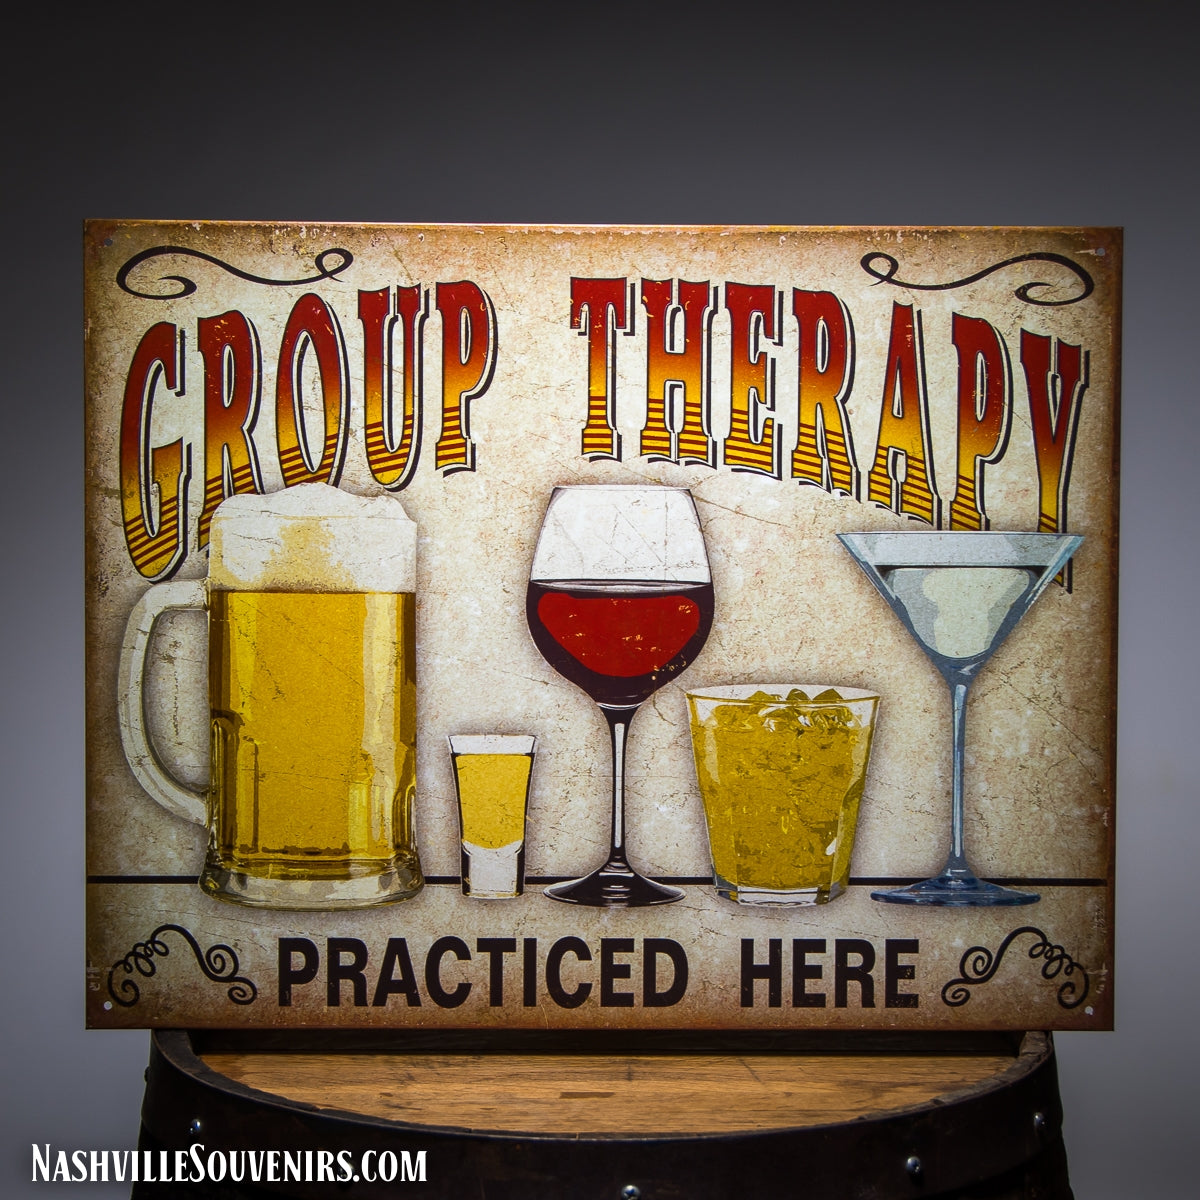 Group Therapy Practiced Here Tin Sign